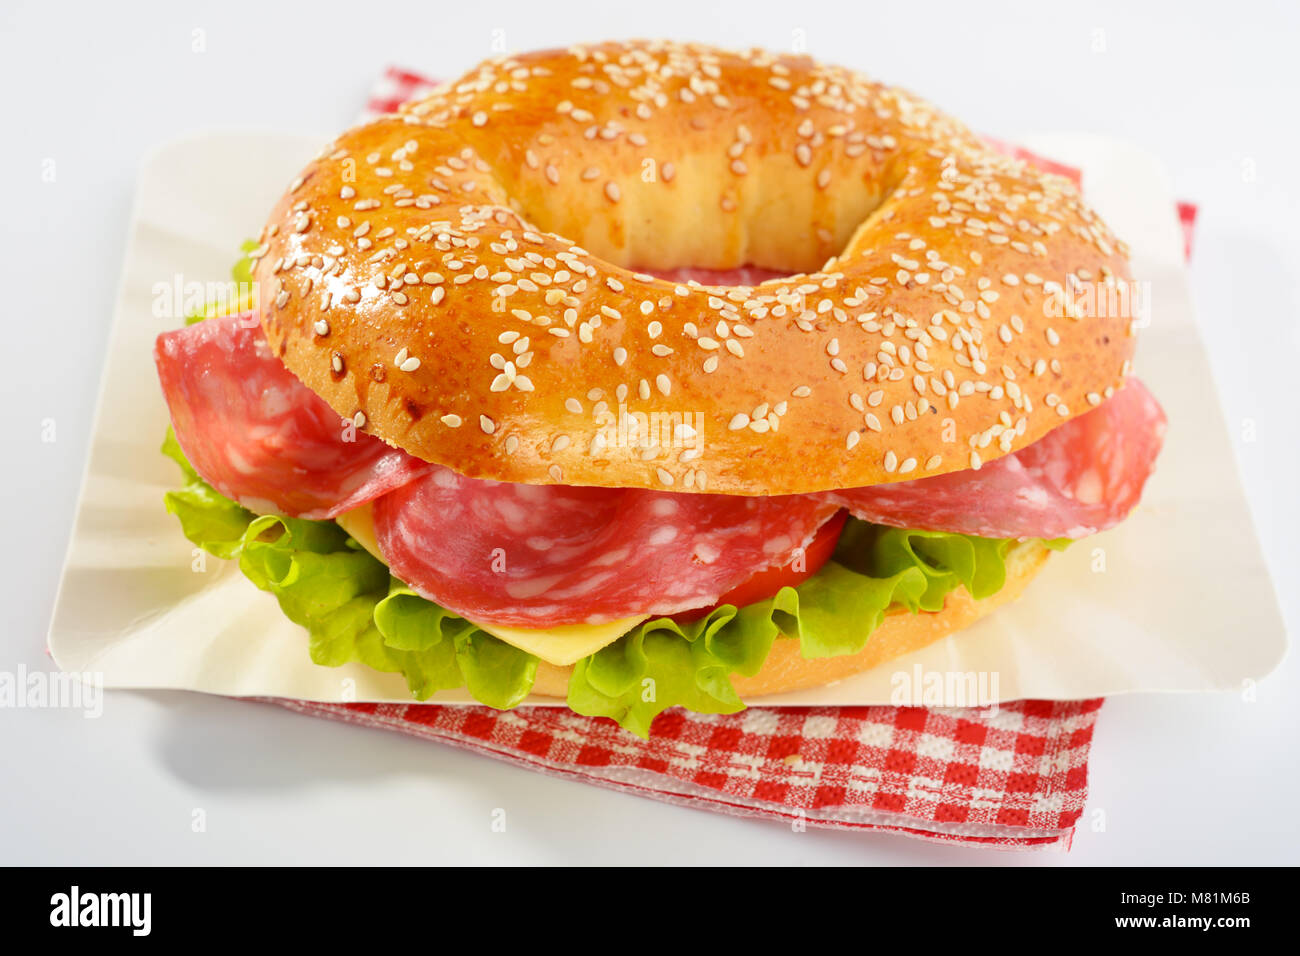 Bagel sandwich with sausage, cheese, and lettuce on a paper plate Stock Photo